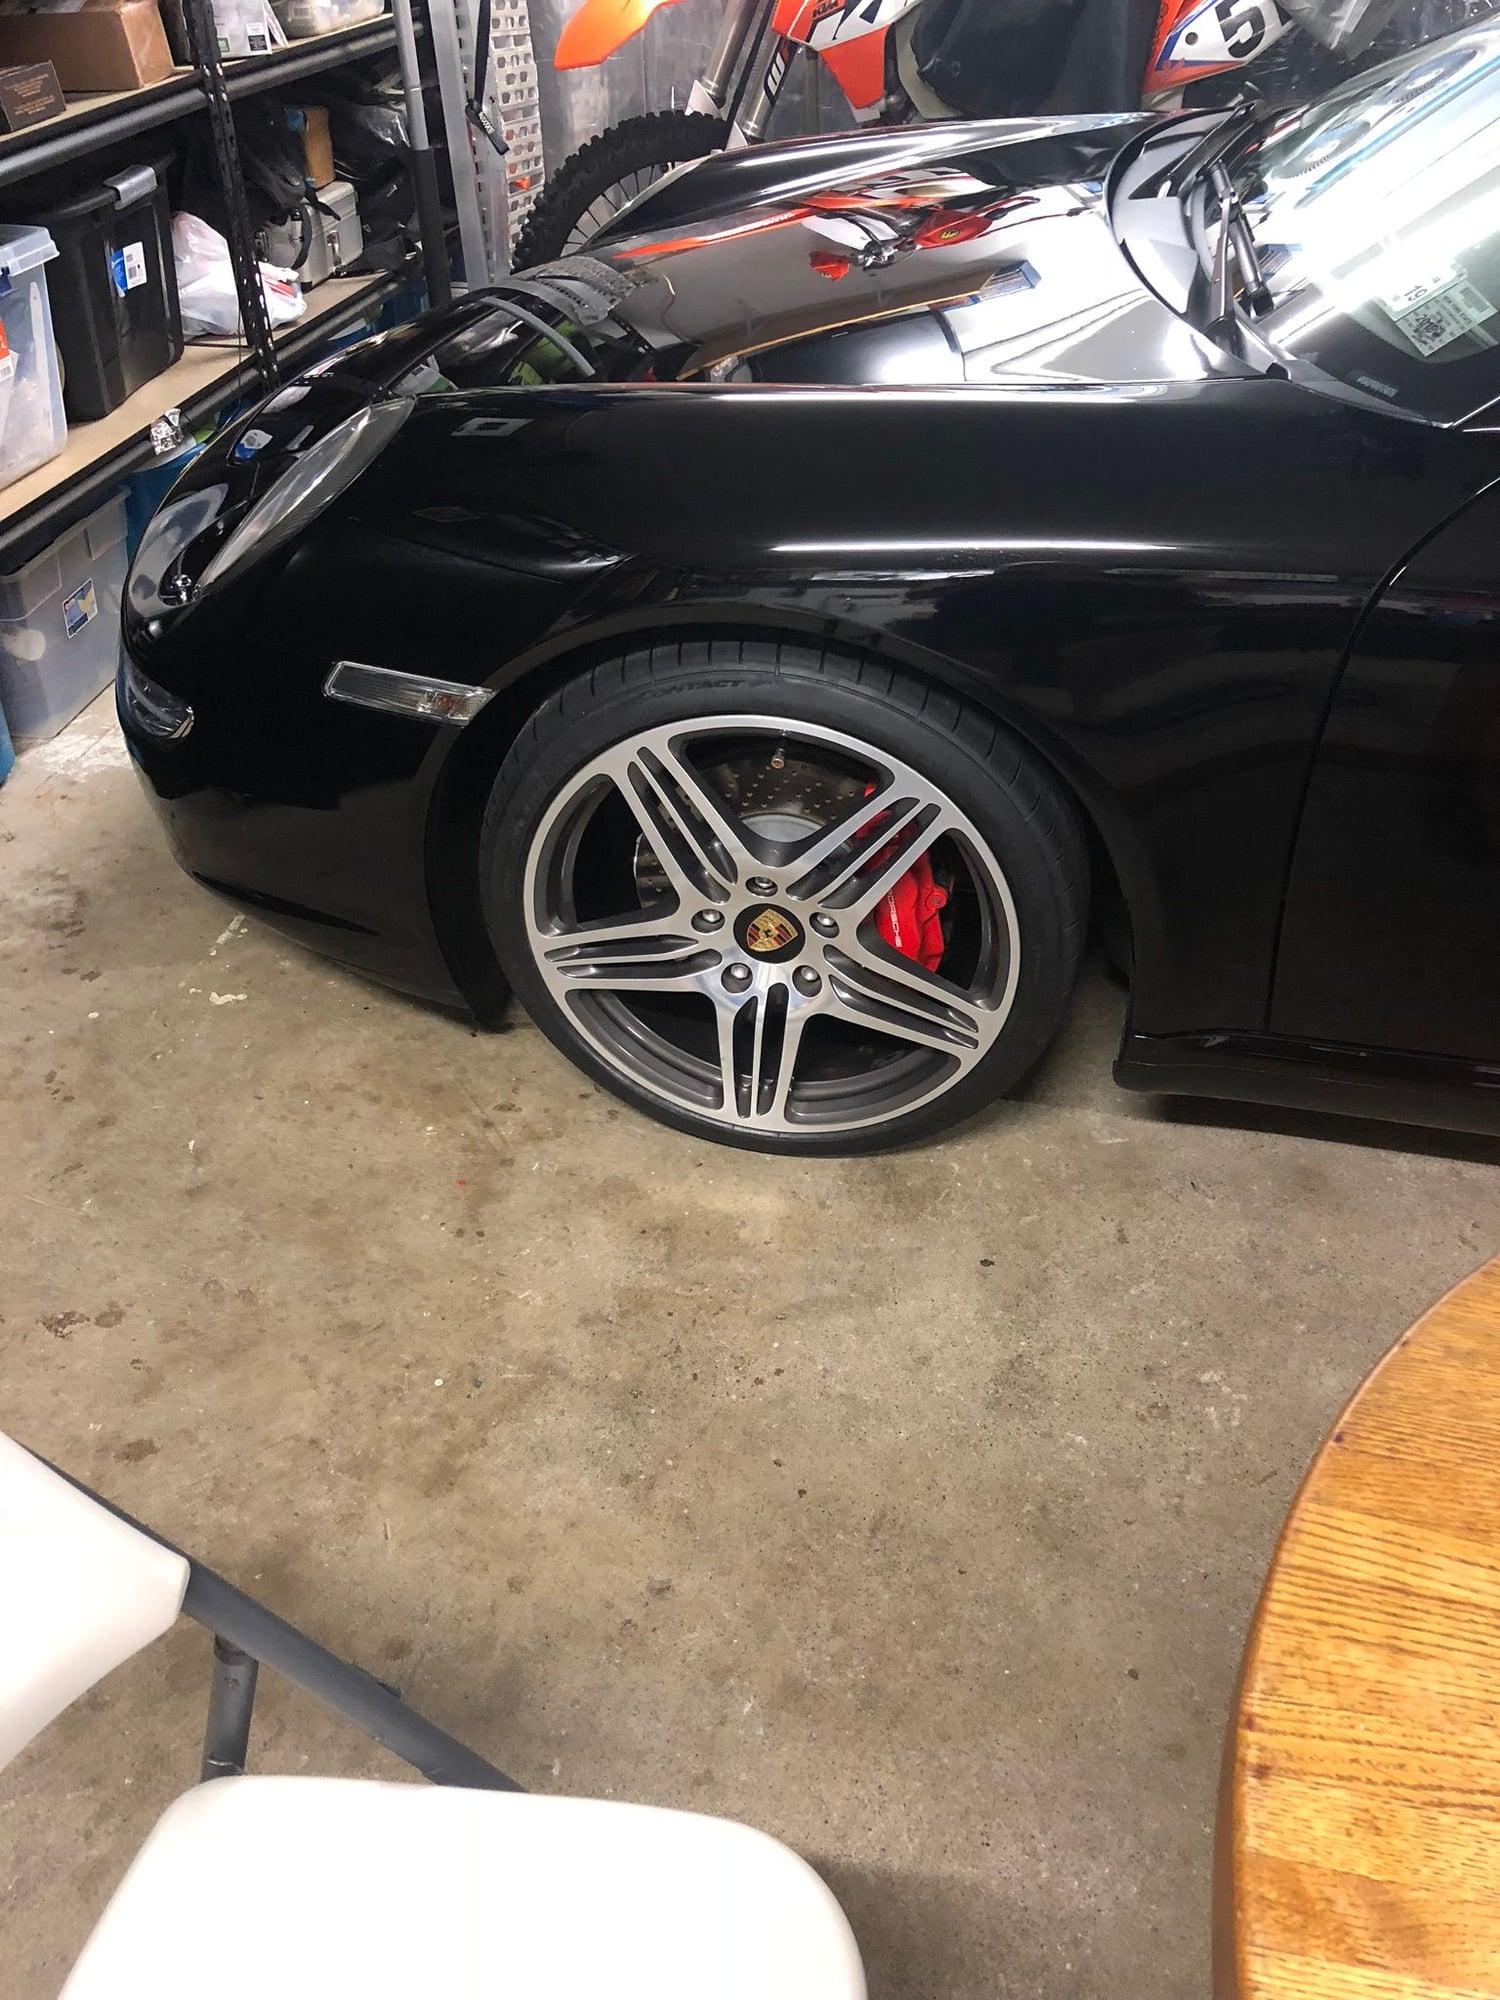 2005 Porsche 911 - 2005 Porsche 997 - Used - VIN 888888888888 - 82,000 Miles - 6 cyl - 2WD - Manual - Coupe - Black - Mahopac, NY 10541, United States